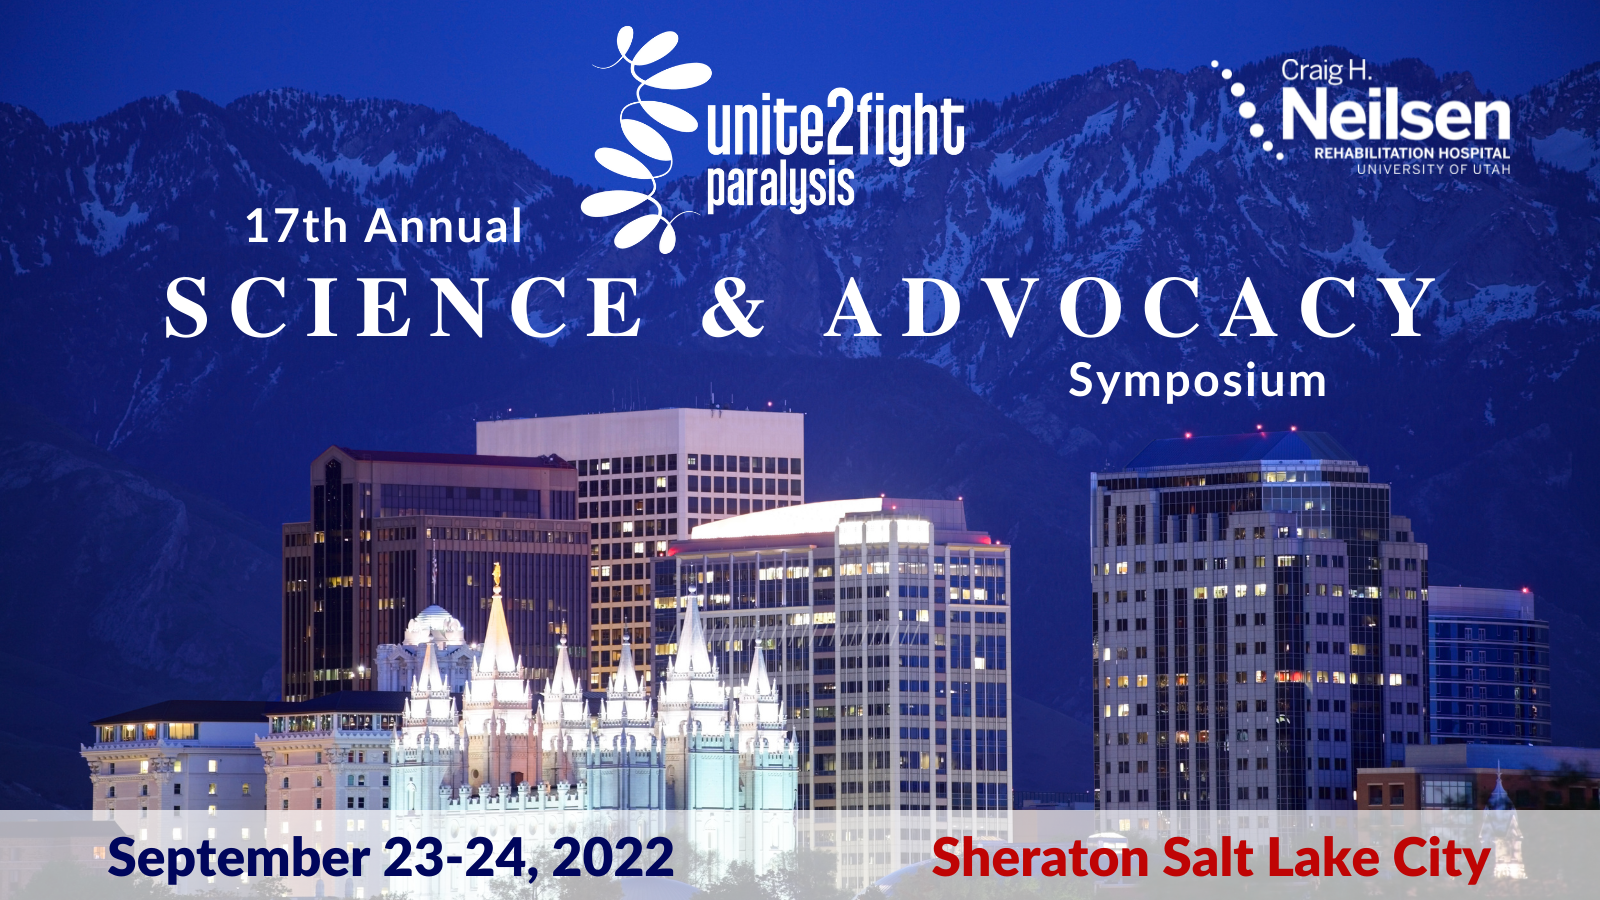 Unite 2 Fight Paralysis Annual Symposium 2022 Flier with photo of the Salt Lake City Temple and Downtown area behind the logo.